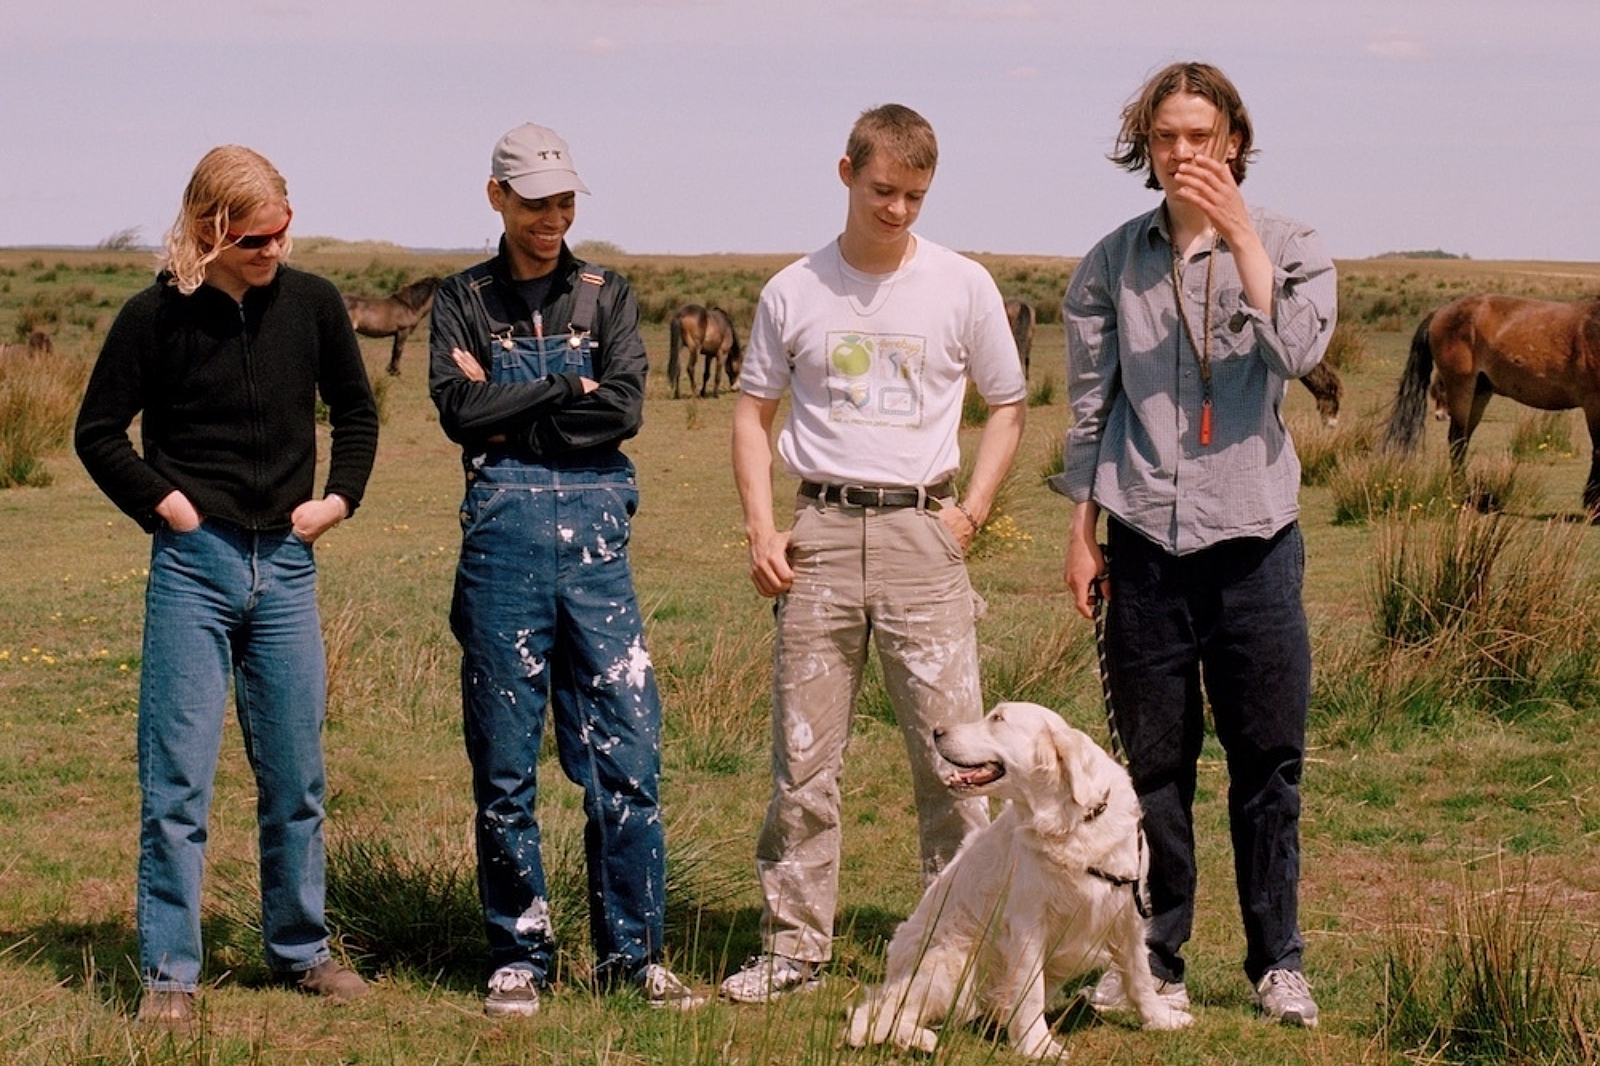 Liss team up with Nilüfer Yanya for 'Boys In Movies'